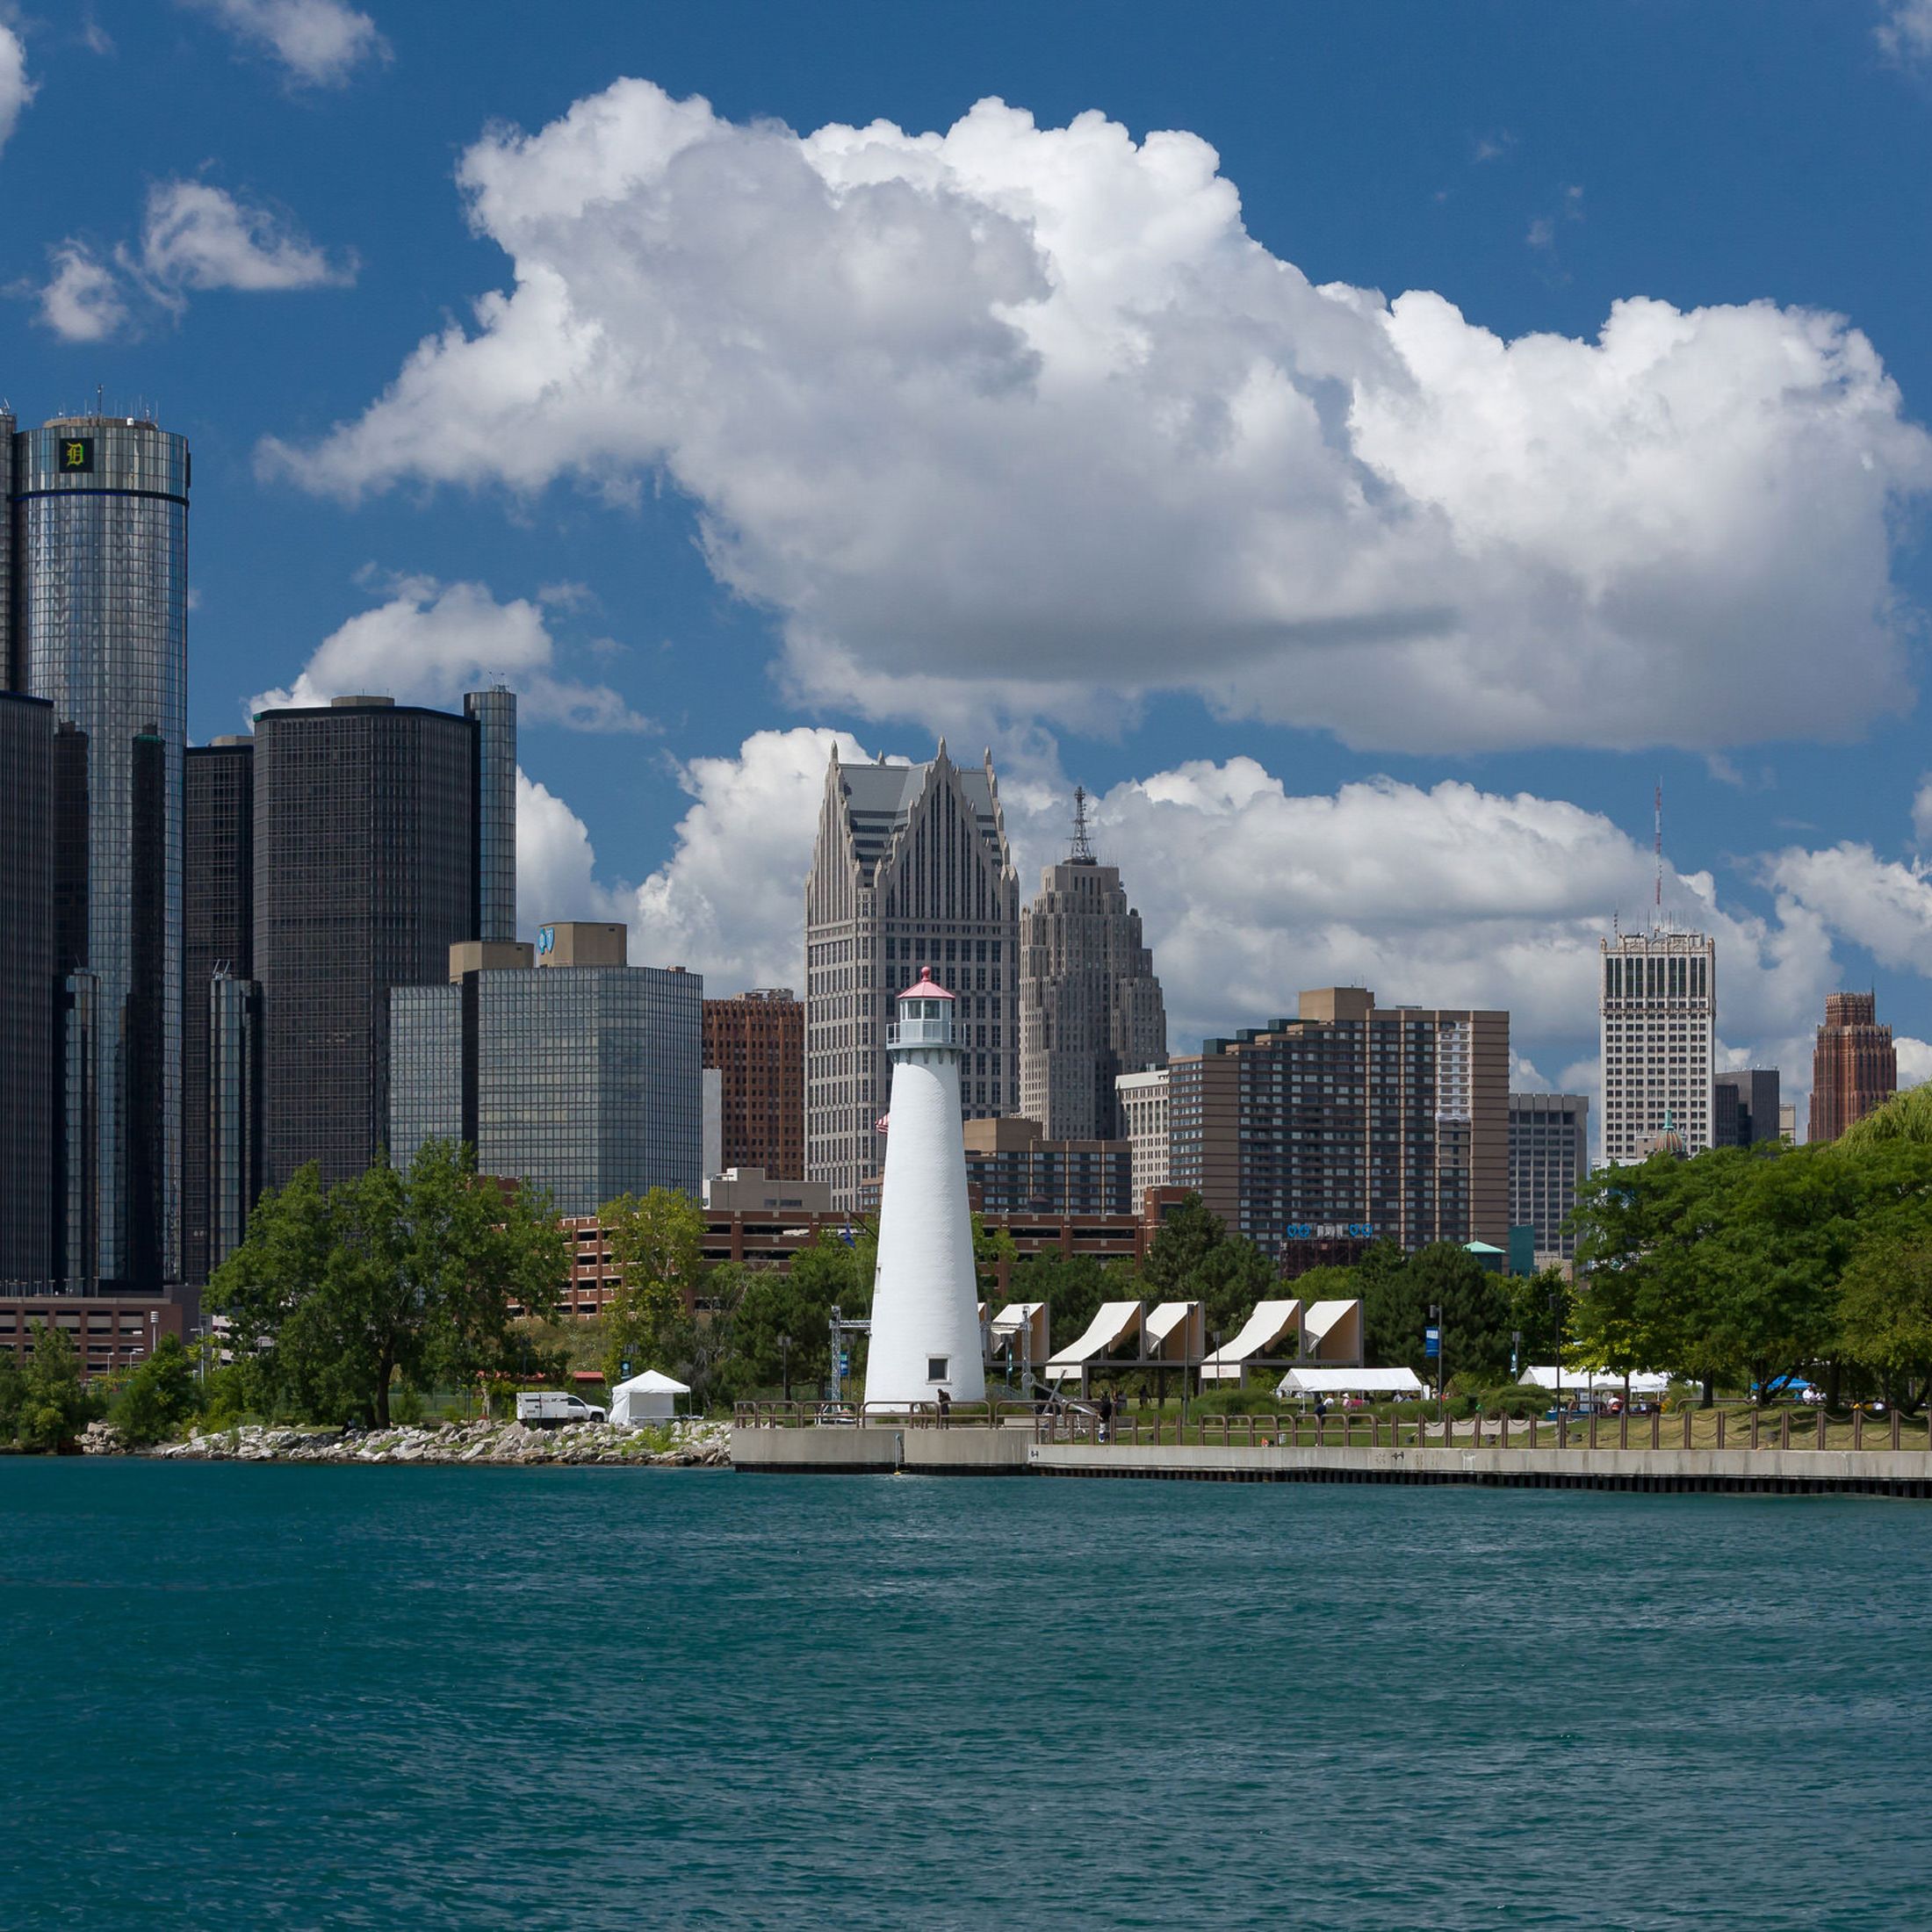 The Detroit, Michigan skyline from the water on a beautiful, sunny day. The sky is bright blue and filled with fluffy, white clouds. 